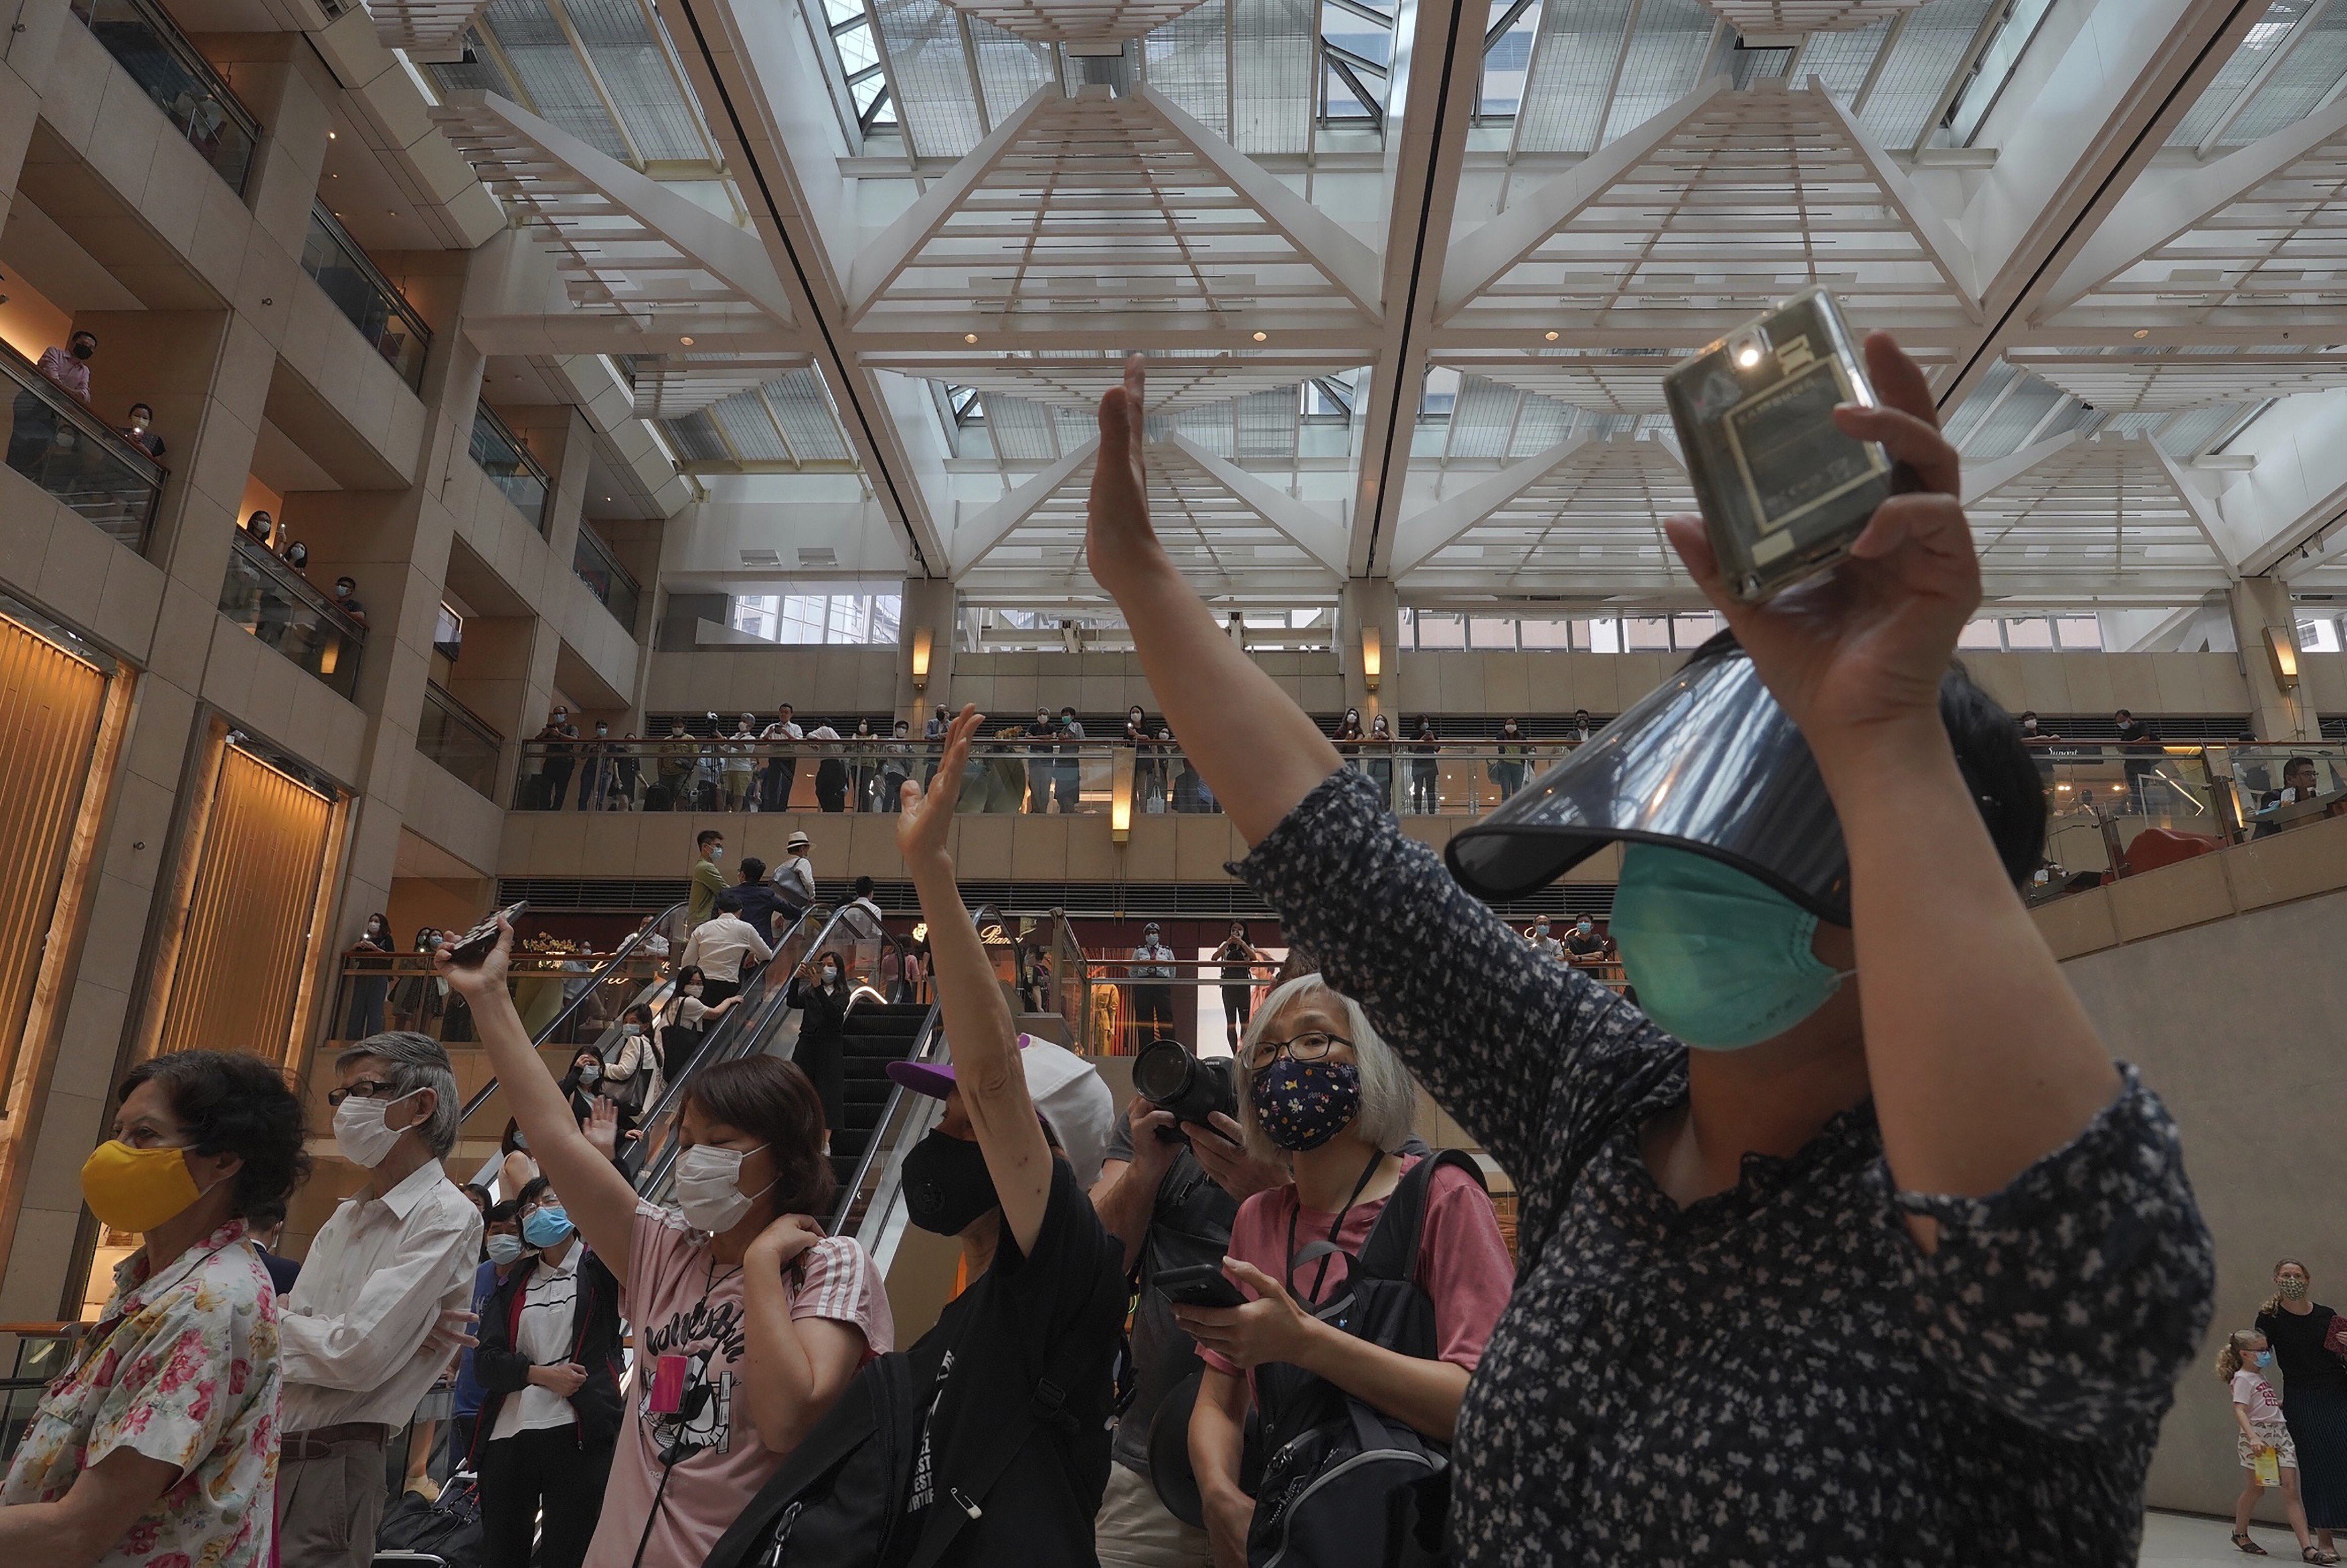 Protesters gesture with five fingers, signifying “five demands, not one less”, in a shopping centre during a protest on June 1 against China's national security legislation for Hong Kong. Photo: AP